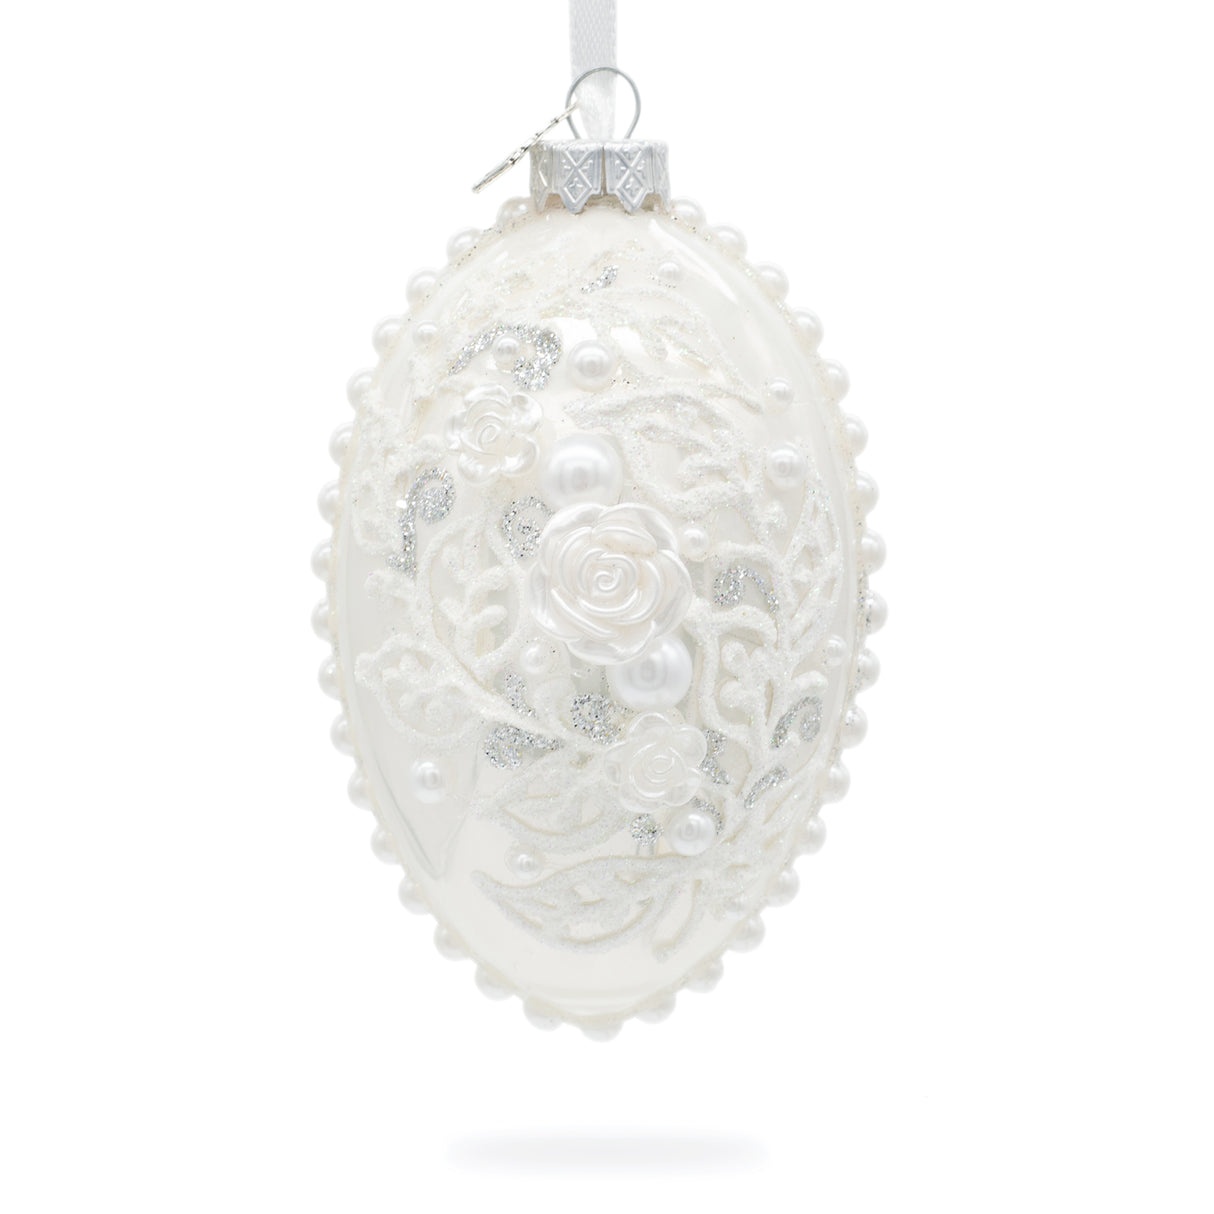 Glass 3D Pearl Roses Glass Egg Ornament 4 Inches in White color Oval